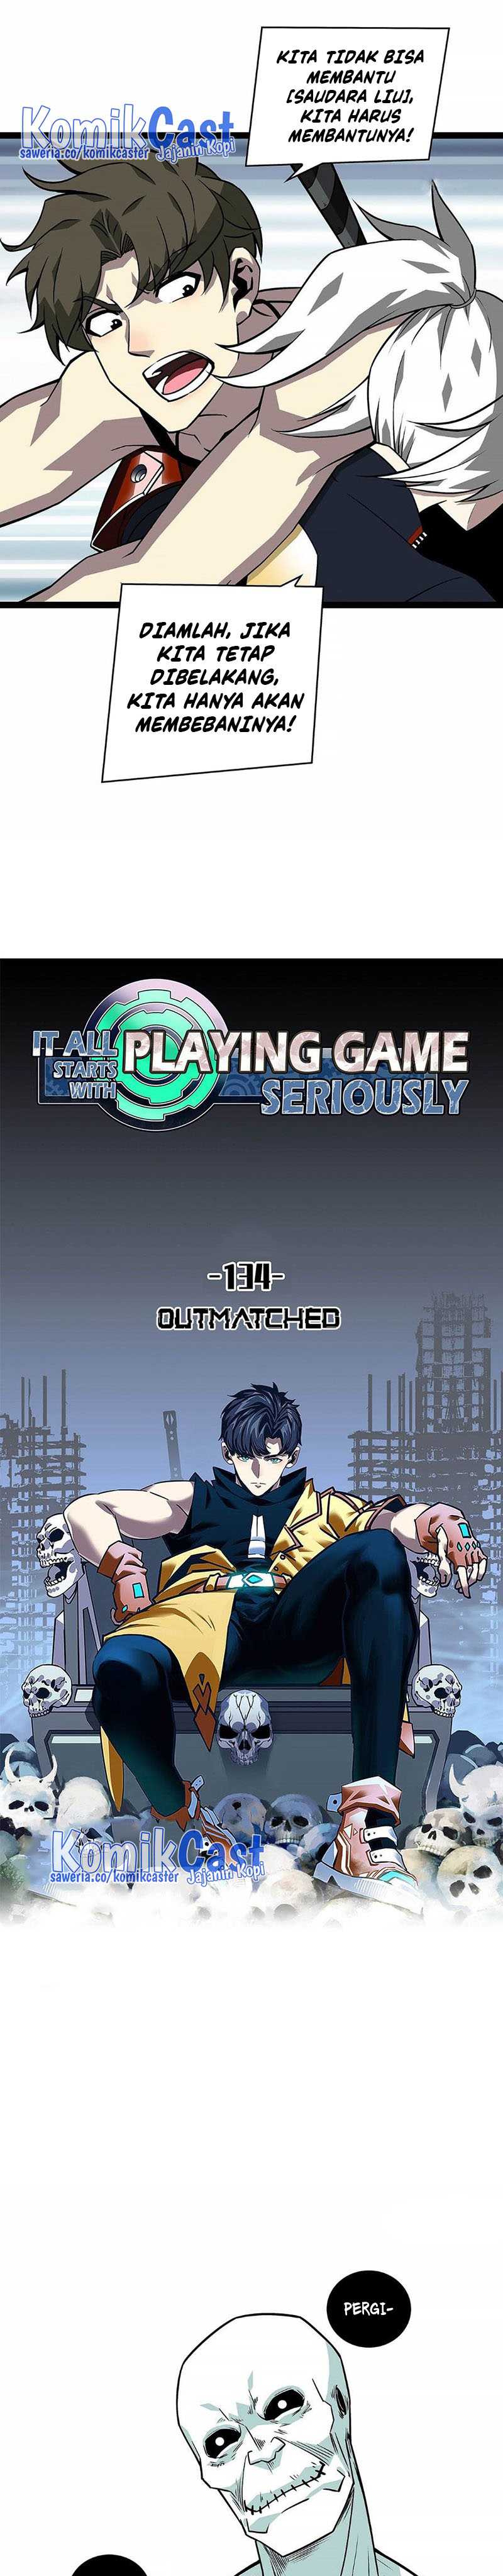 It all starts with playing game seriously Chapter 134 6